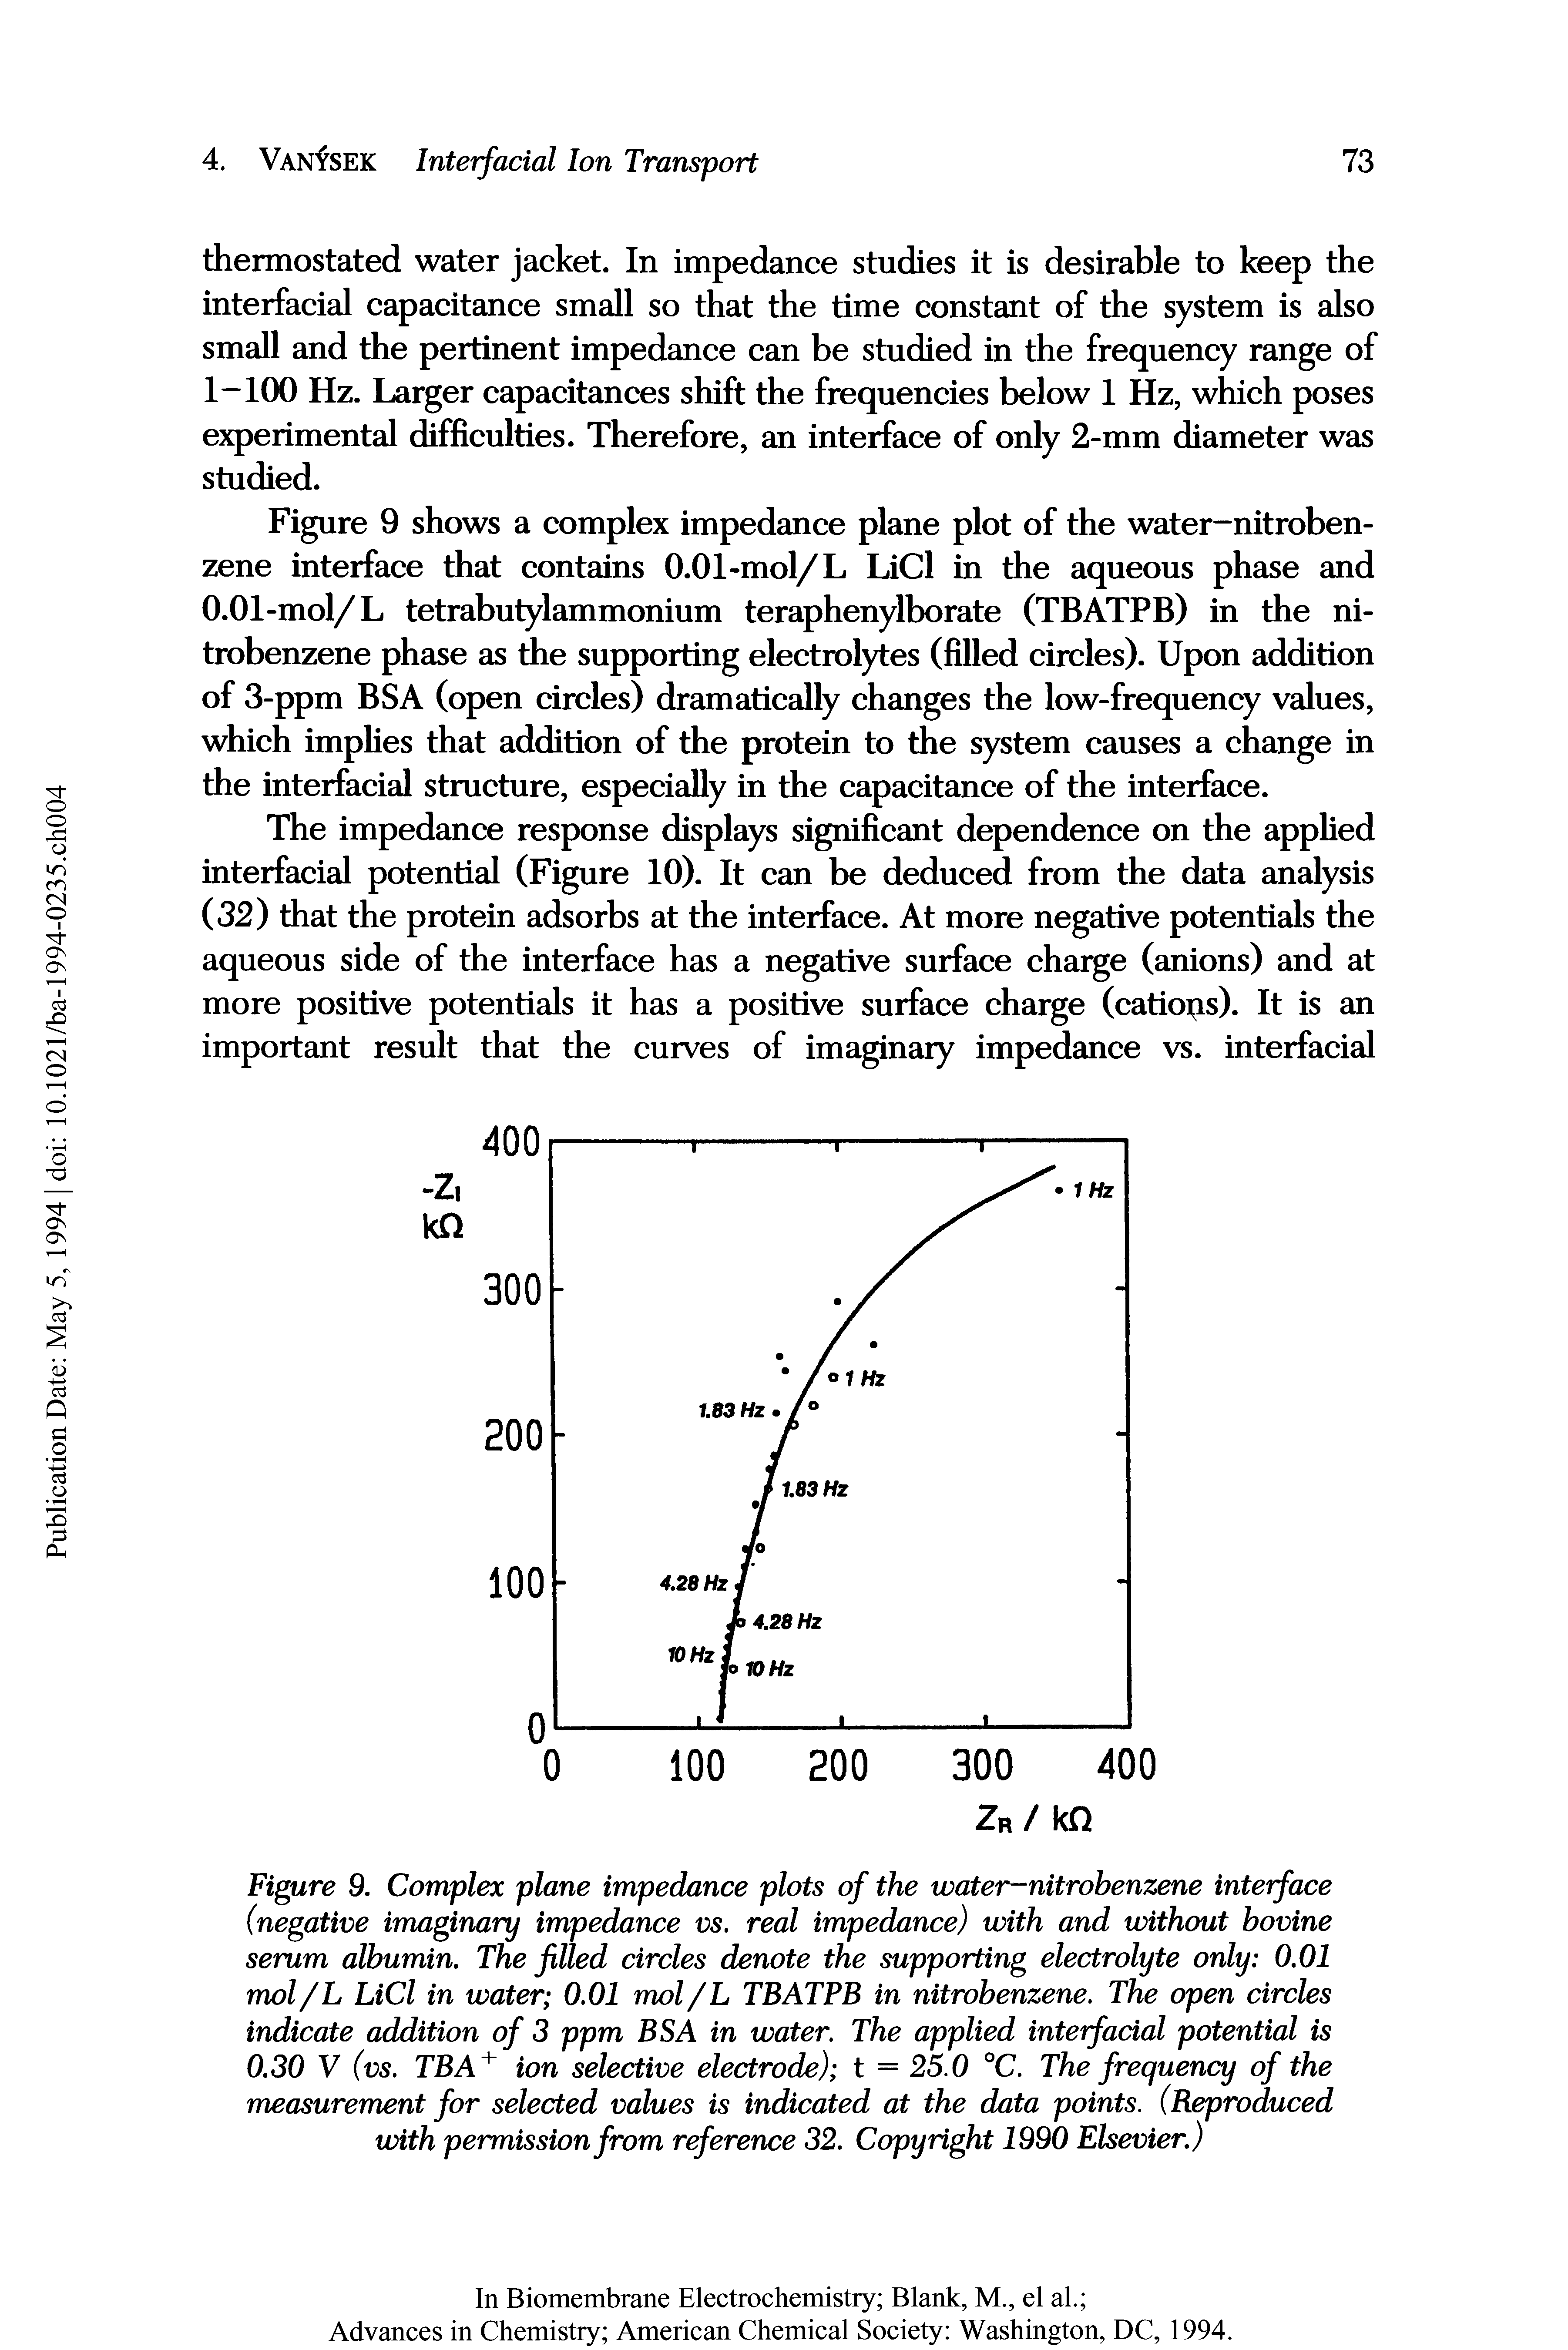 Figure 9. Complex plane impedance plots of the water-nitrobenzene interface (negative imaginary impedance vs. real impedance) with and without bovine serum albumin. The filled circles denote the supporting electrolyte only 0.01 mol/L LiCl in water 0.01 mol/L TBATPB in nitrobenzene. The open circles indicate addition of 3 ppm BSA in water. The applied interfacial potential is 0.30 V (vs. TBA+ ion selective electrode) t = 25.0 °C. The frequency of the measurement for selected values is indicated at the data points. (Reproduced with permission from reference 32. Copyright 1990 Elsevier.)...